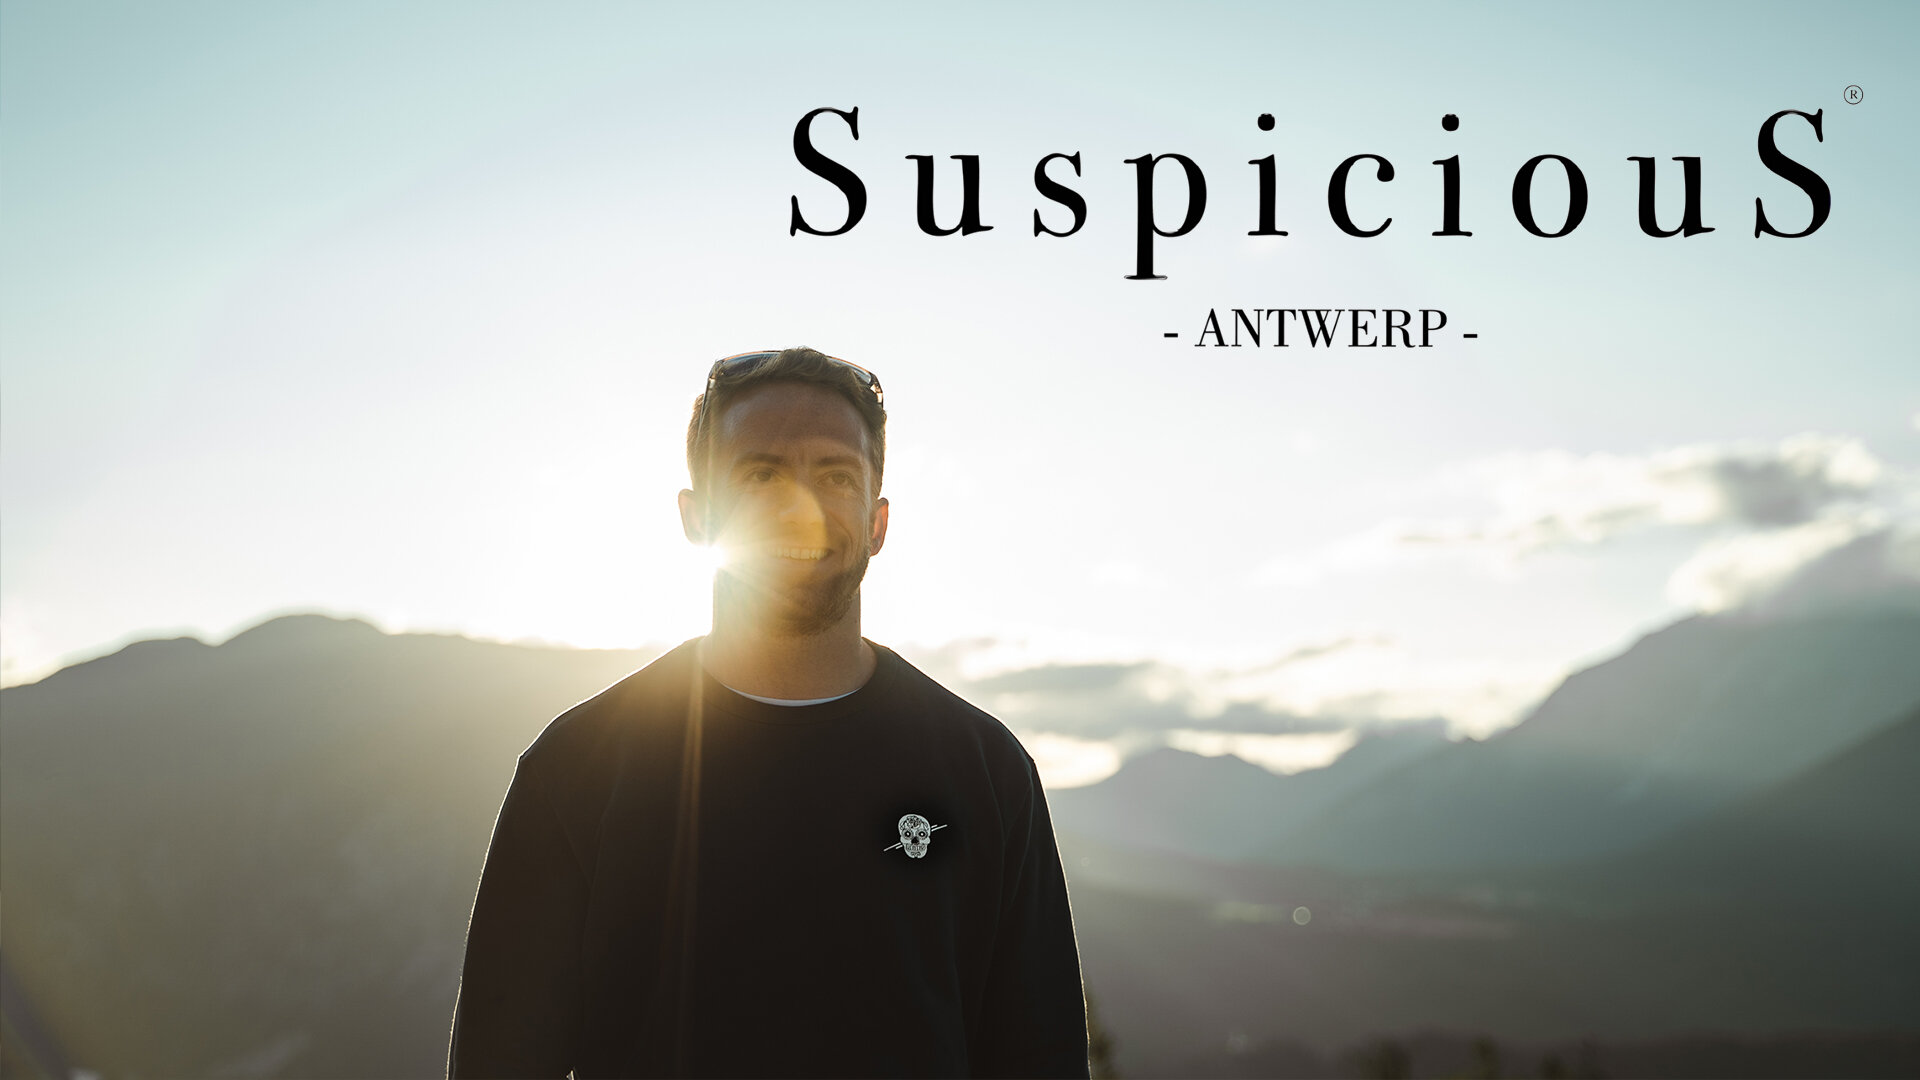 Suspicious Antwerp - A Day in the Life of Alain Kohl